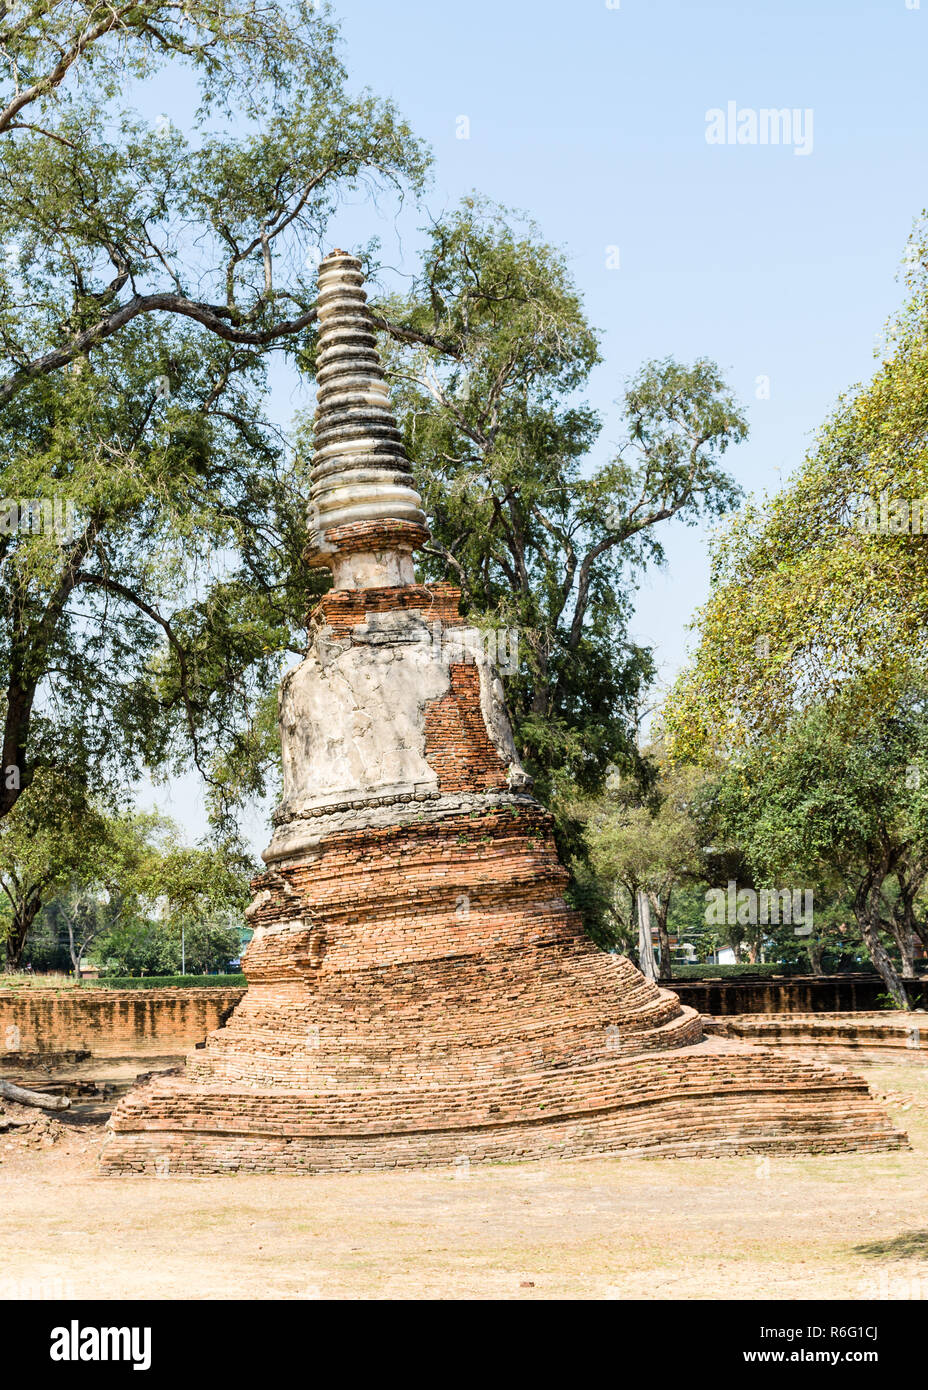 Destroyed chedis in Ayutthaya Historical Park, Thailand Stock Photo